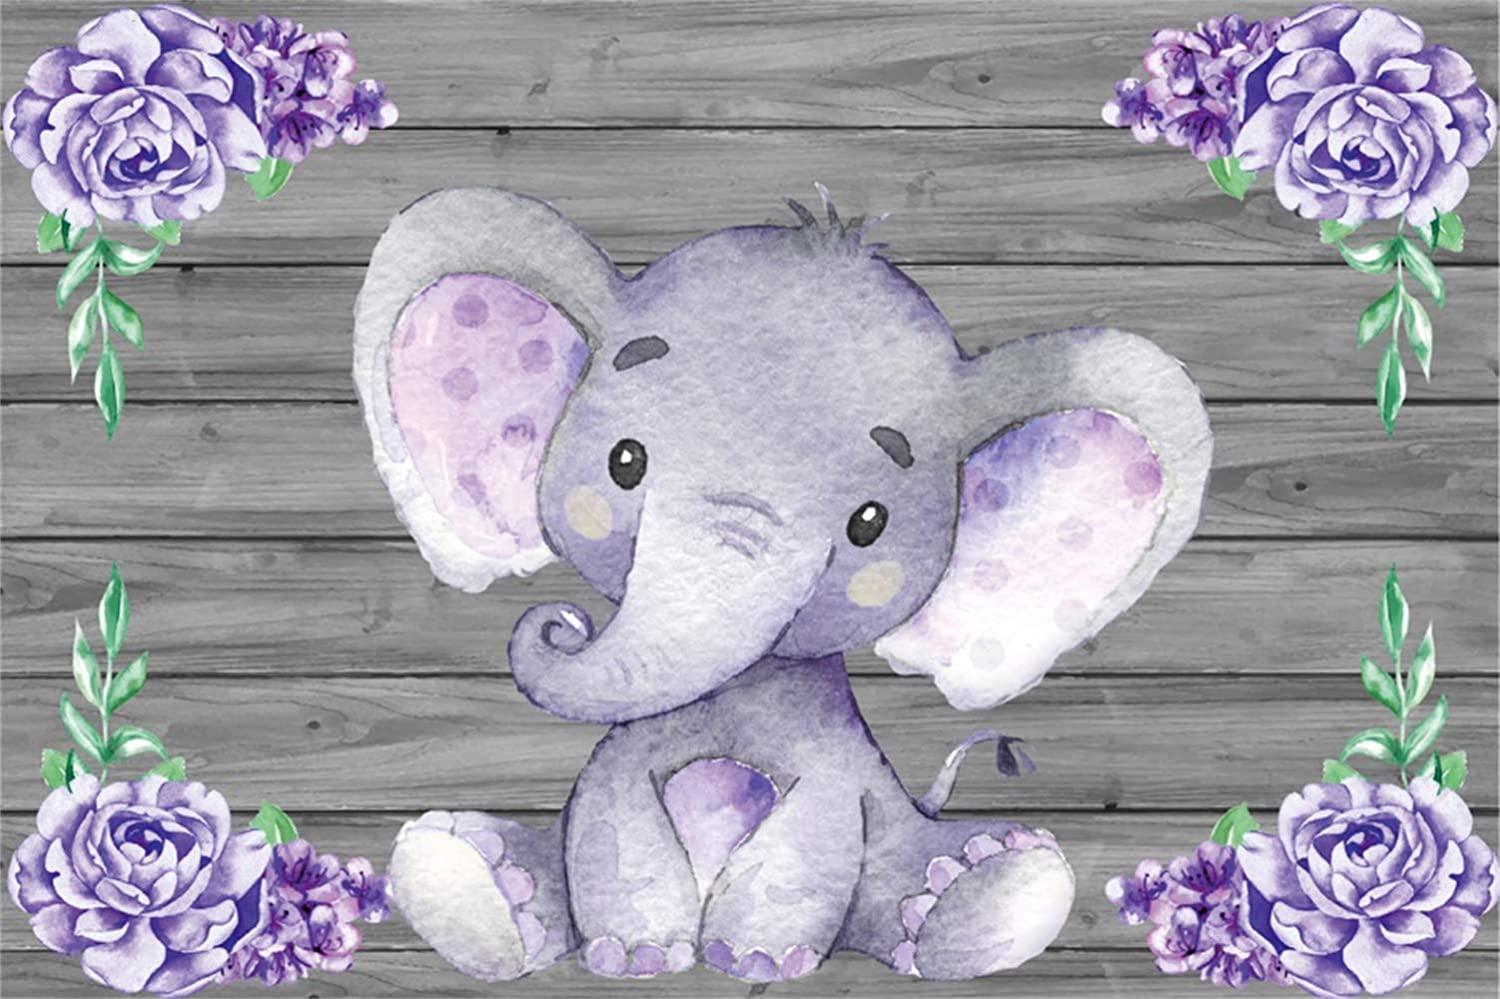 Amazon.com, Laeacco Cute Purple Elephant Backdrops 7x5ft Polyester Photography Background Wooden Texture Wall with Purple Flowers Baby Shower Girls Baby Birthday Party Decoration Backdrops, Camera & Photo